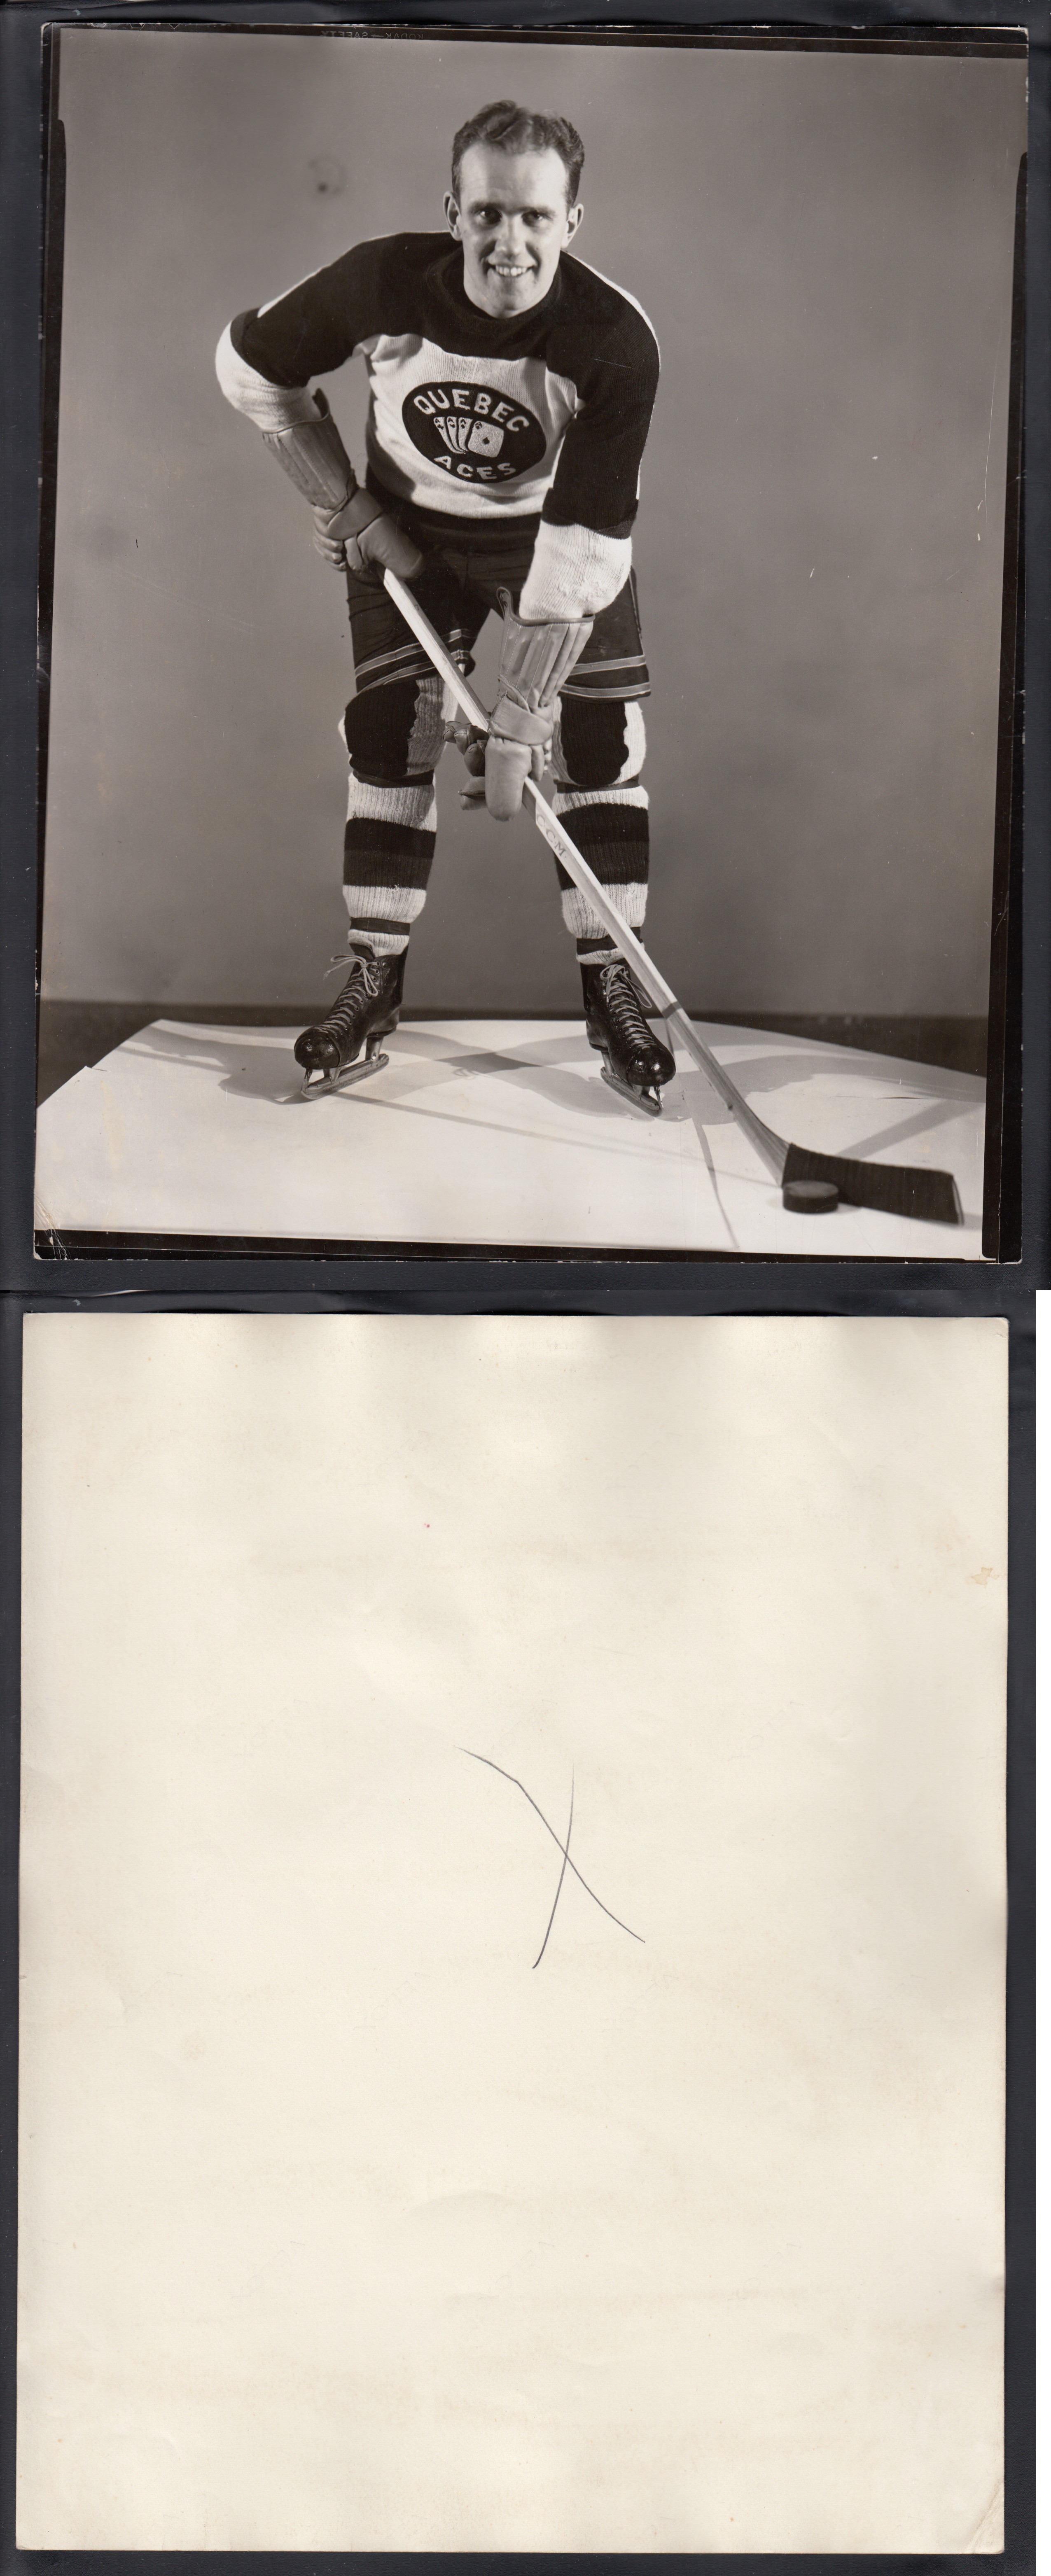 1940'S QUEBEC ACES UNKNOWN PLAYER PHOTO photo